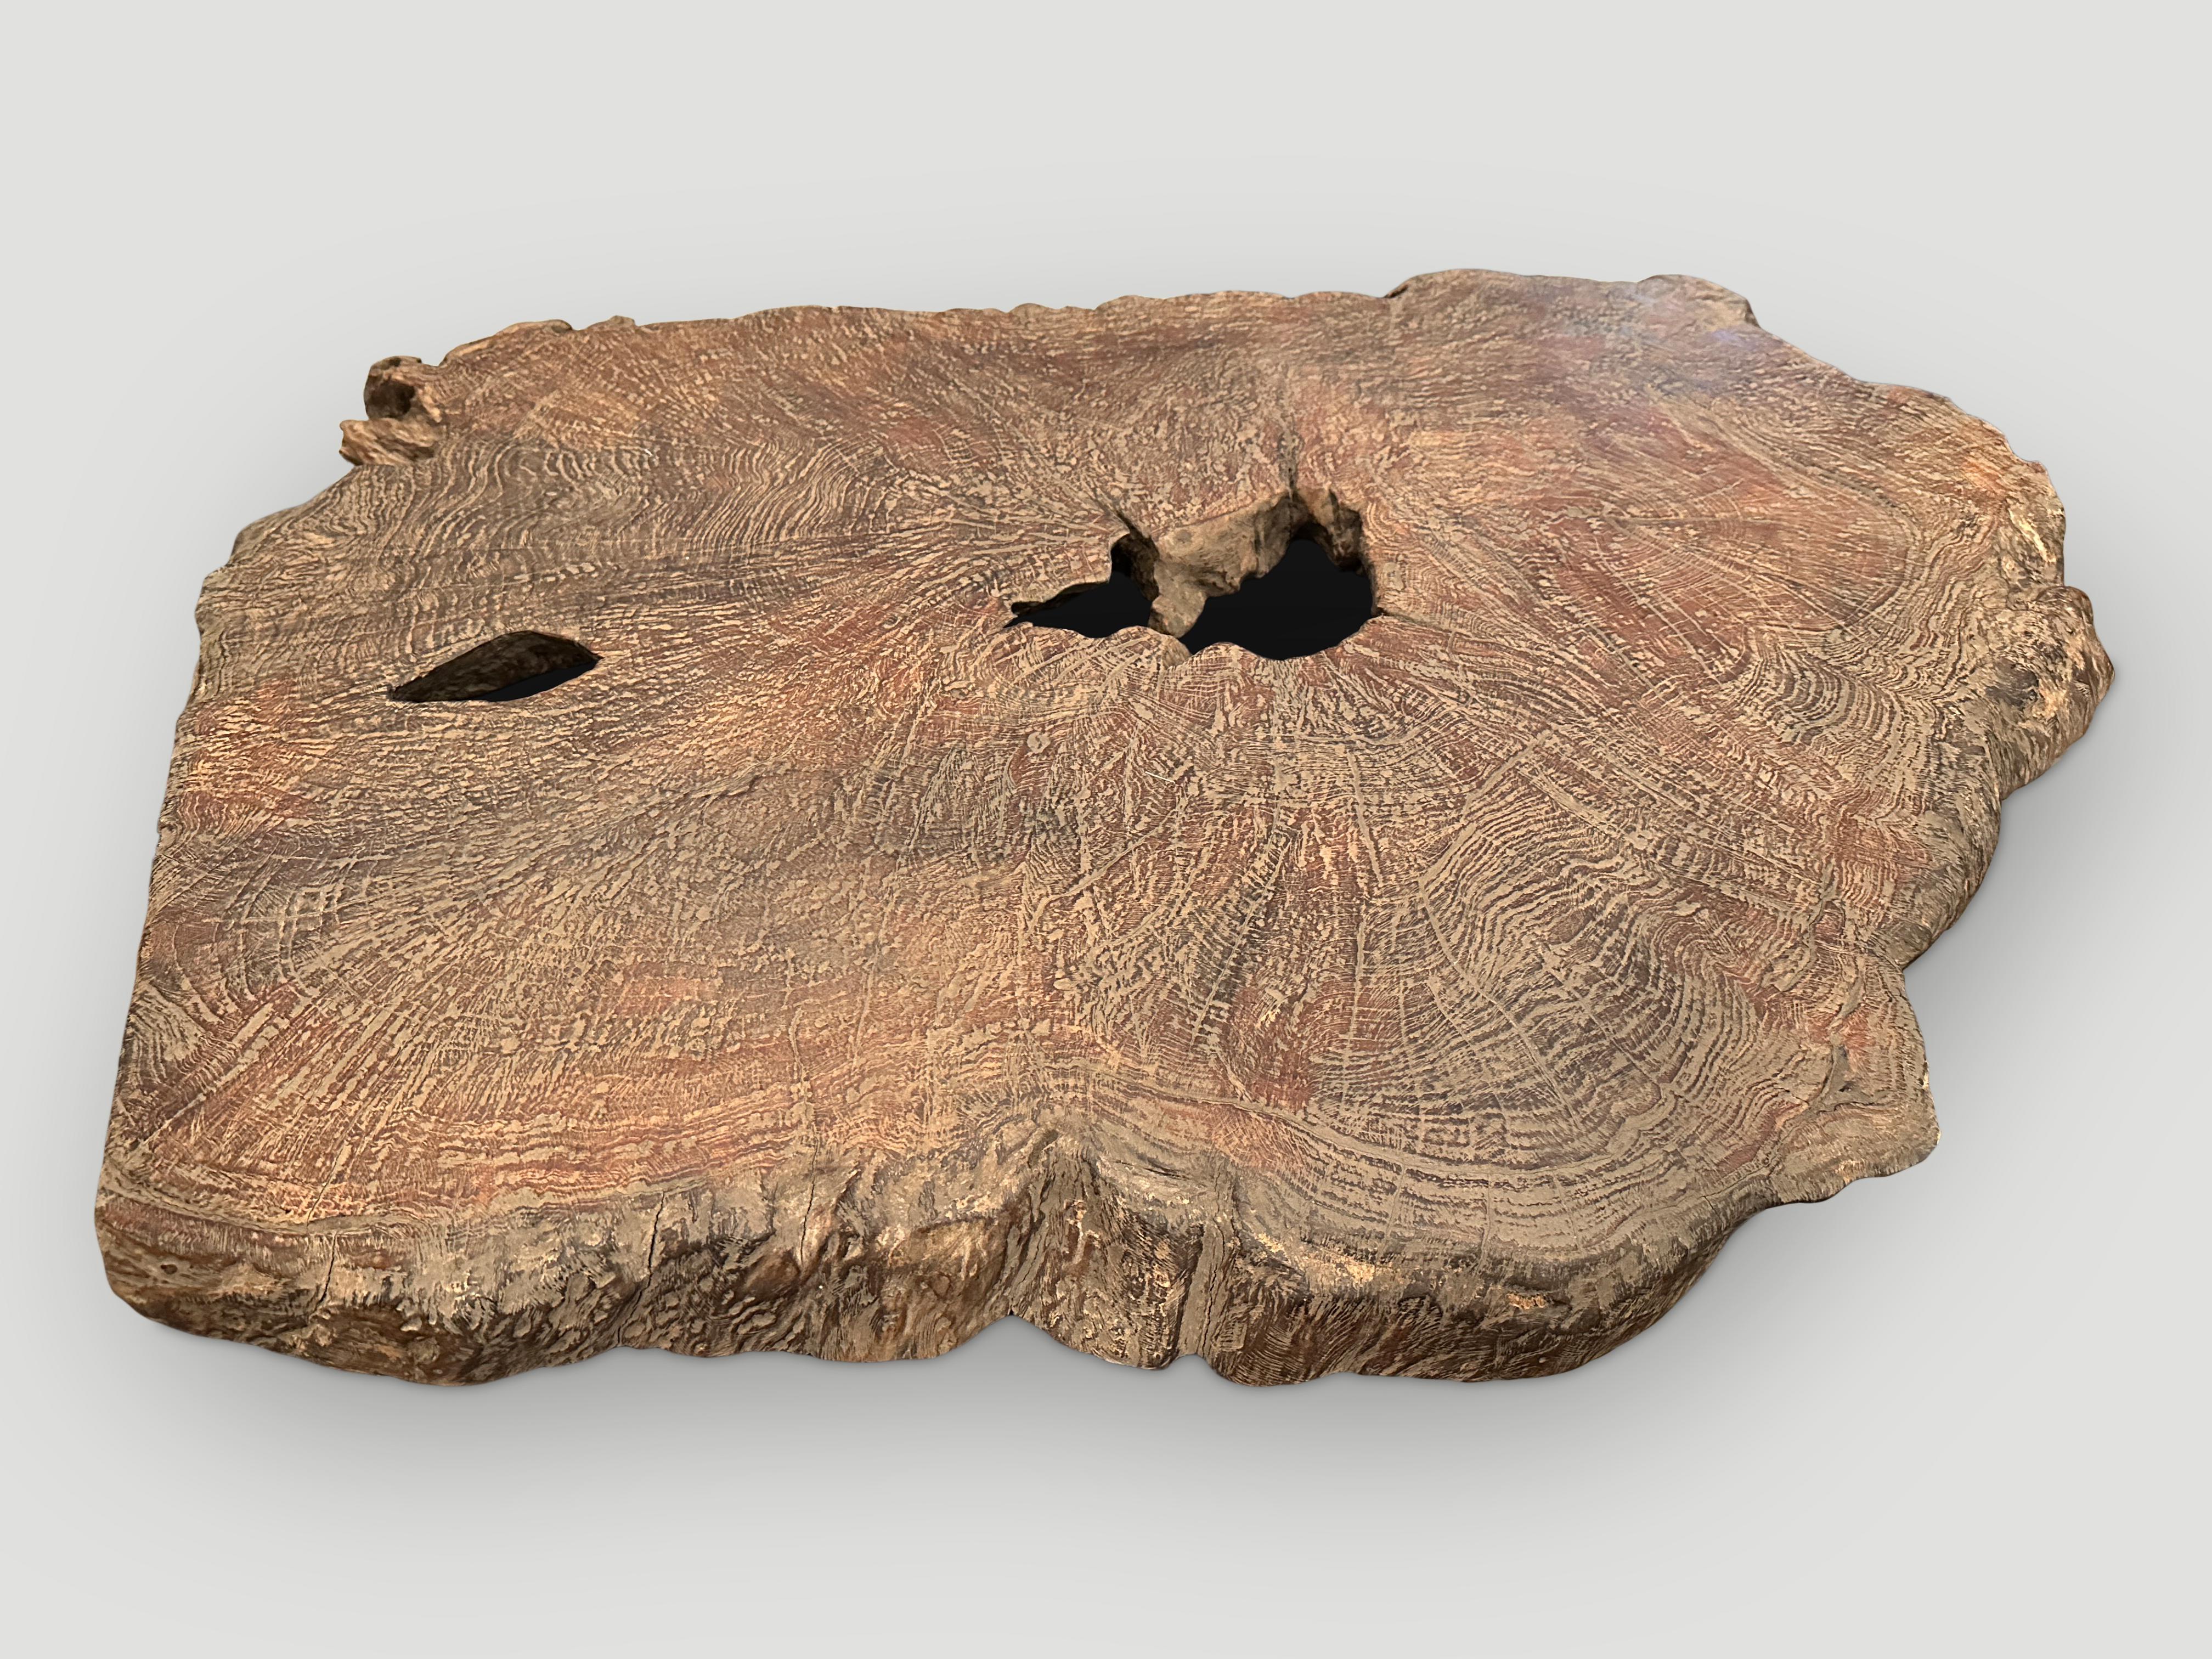 Impressive organic teak sculpture or table top with beautiful wood detail and patina. This rare large slab has beautiful natural erosion on the side and can either be installed on a wall or used as a table top. Both usable and sculptural.

This